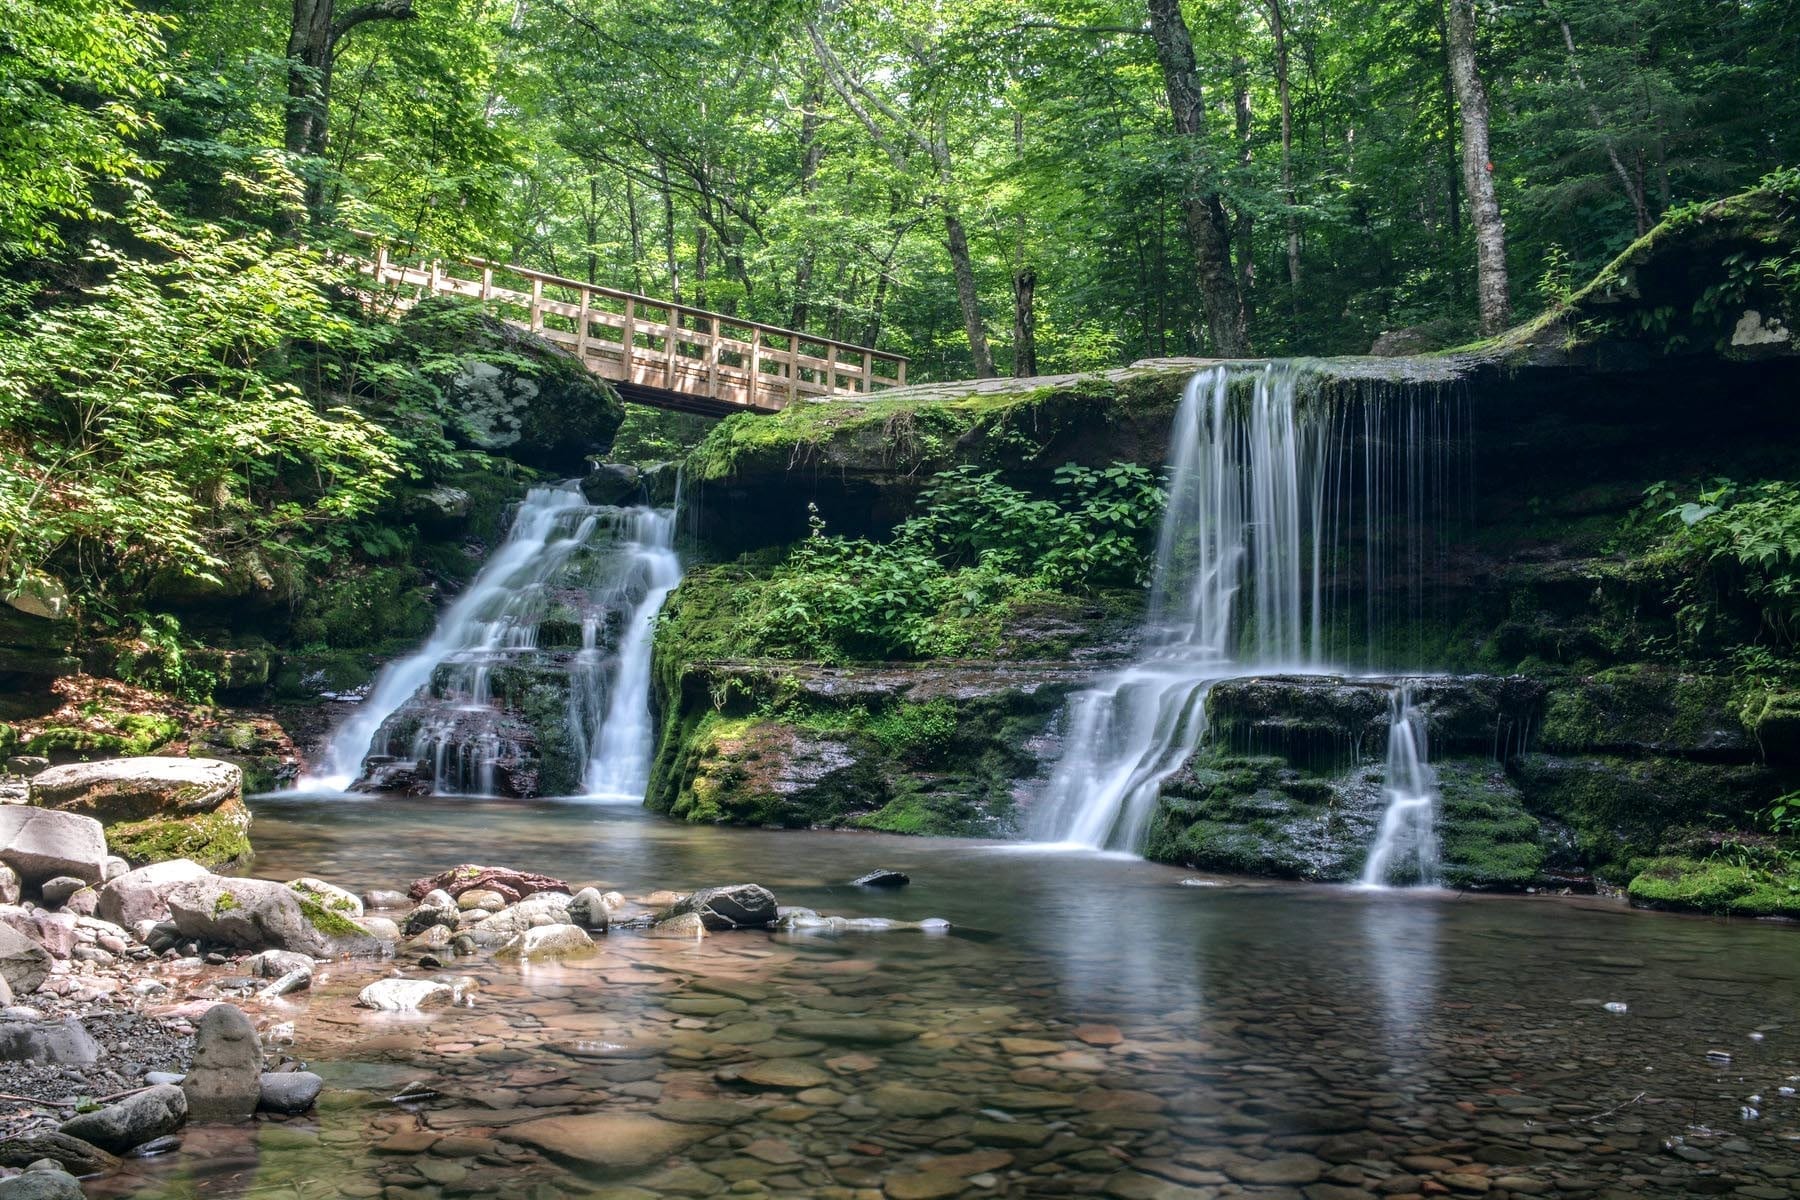 Frenchville Gorge – 6 Waterfalls and small cascades